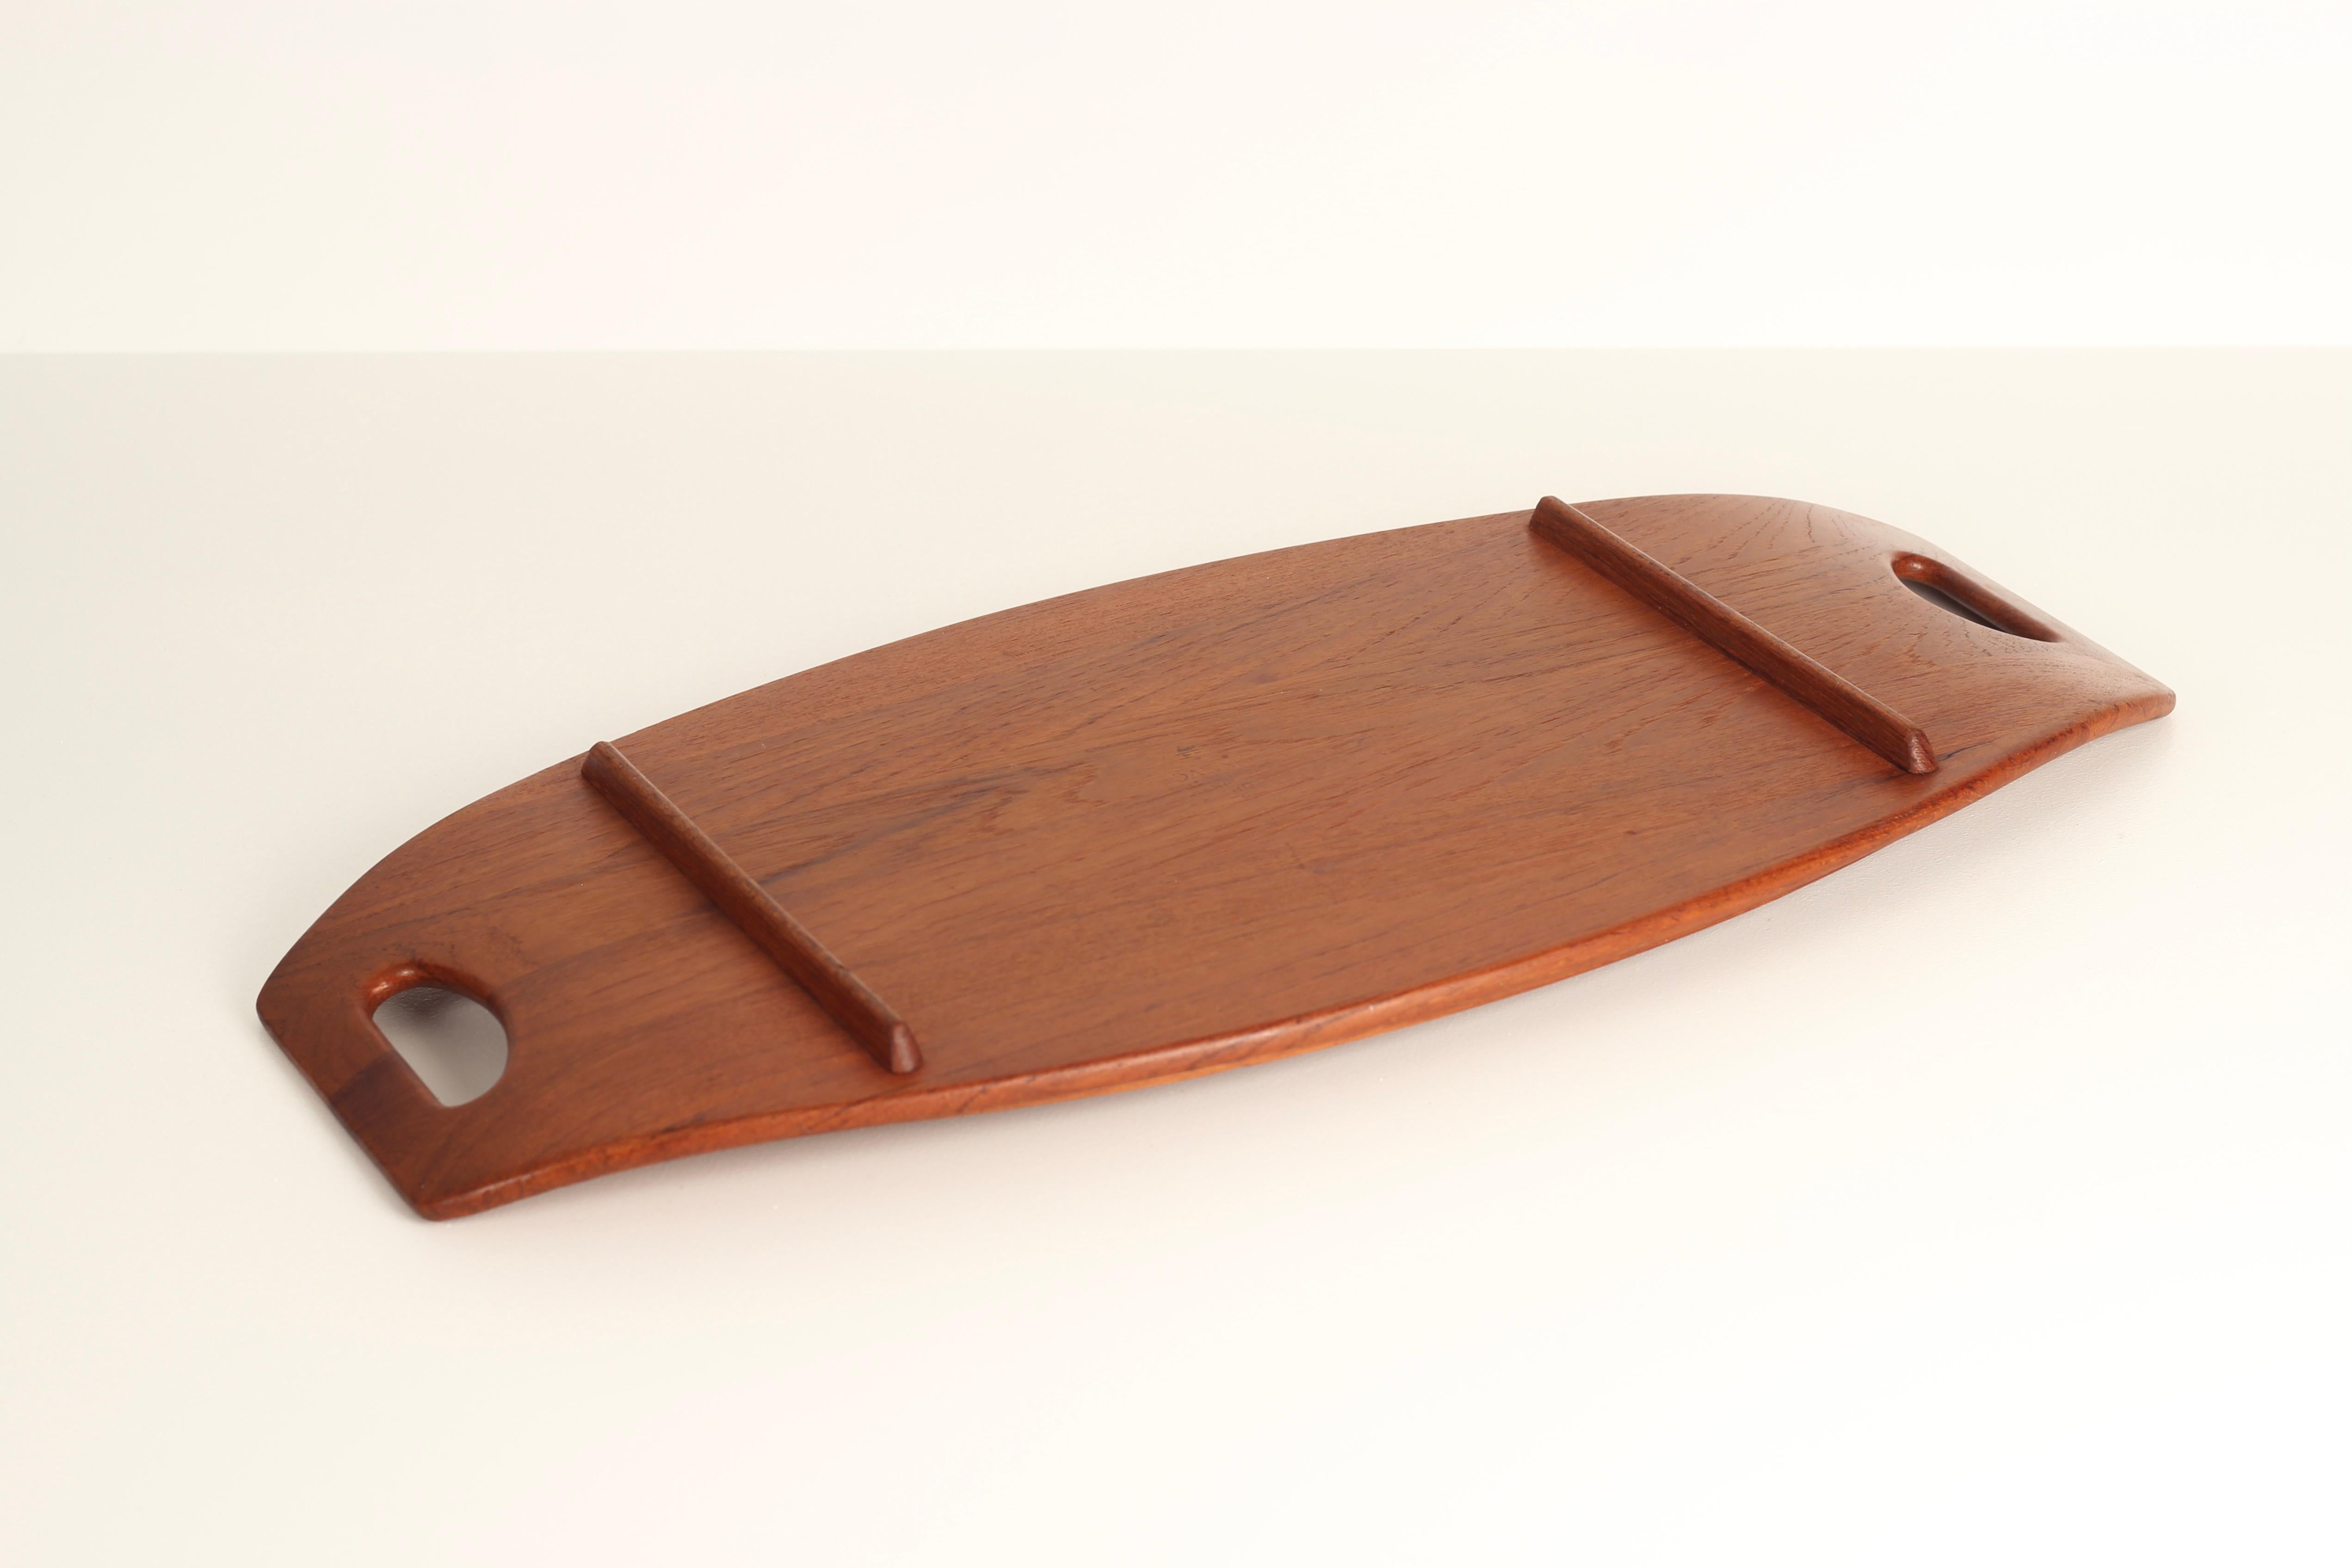 Mid-Century Modern Danish Designed Teak Tray by Jens Quistgaard Made by Dansk In Good Condition For Sale In London, GB